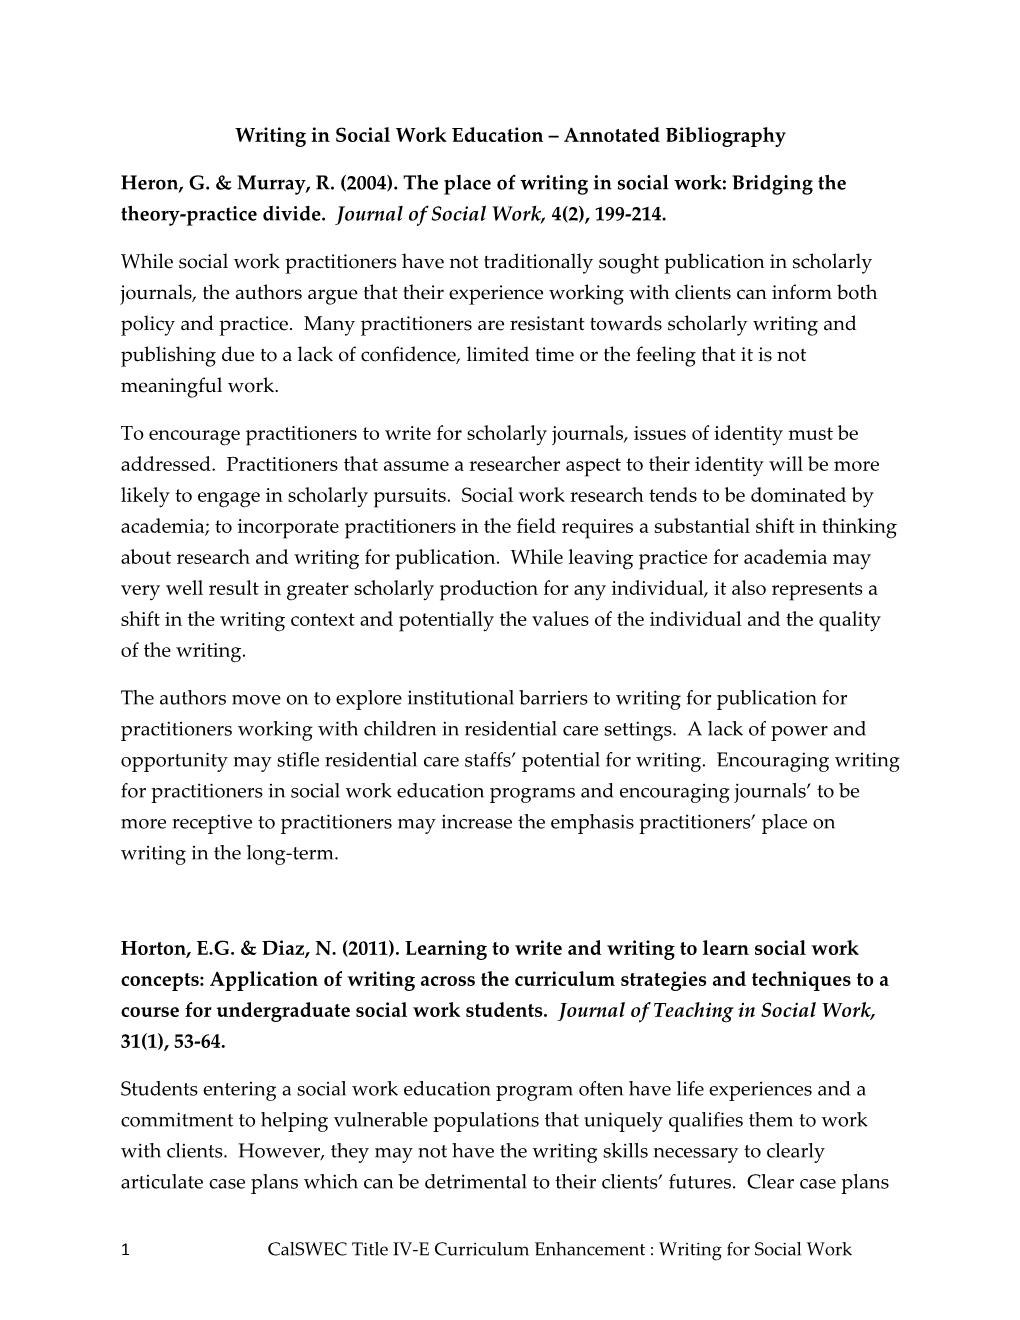 Writing in Social Work Education Annotated Bibliography